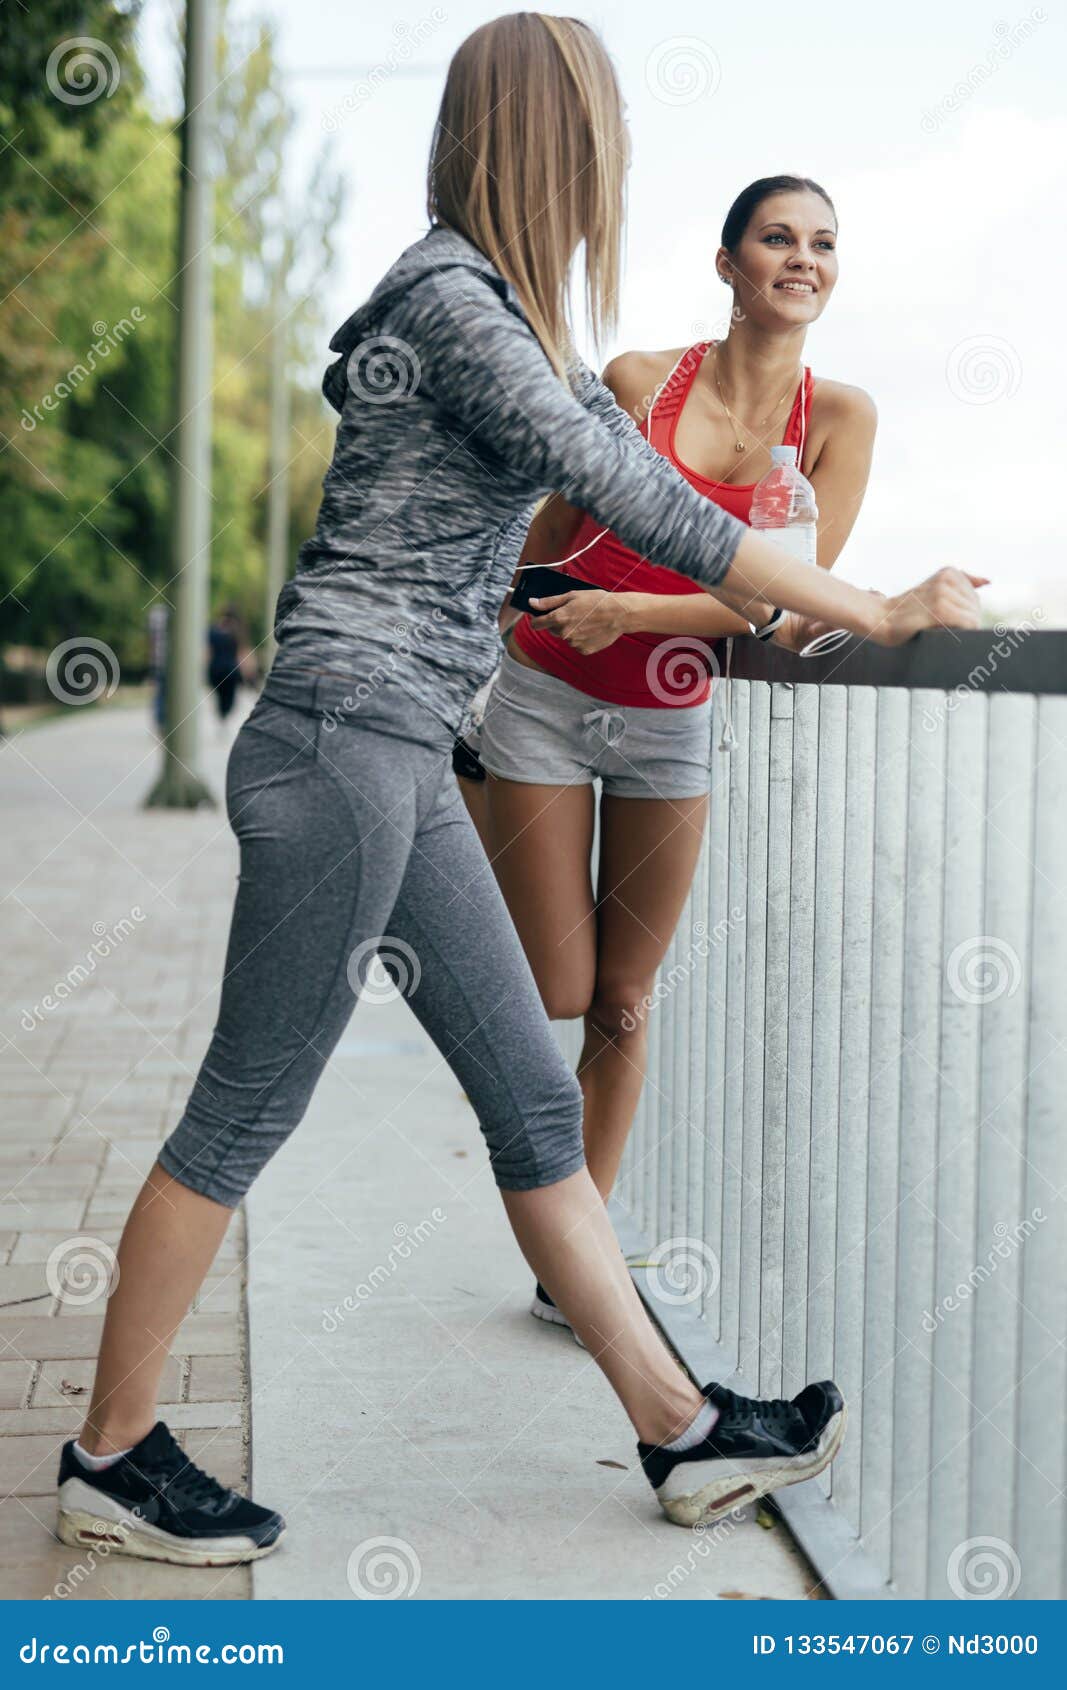 Two Women Stretching Before Jogging Stock Image Image Of Girl 